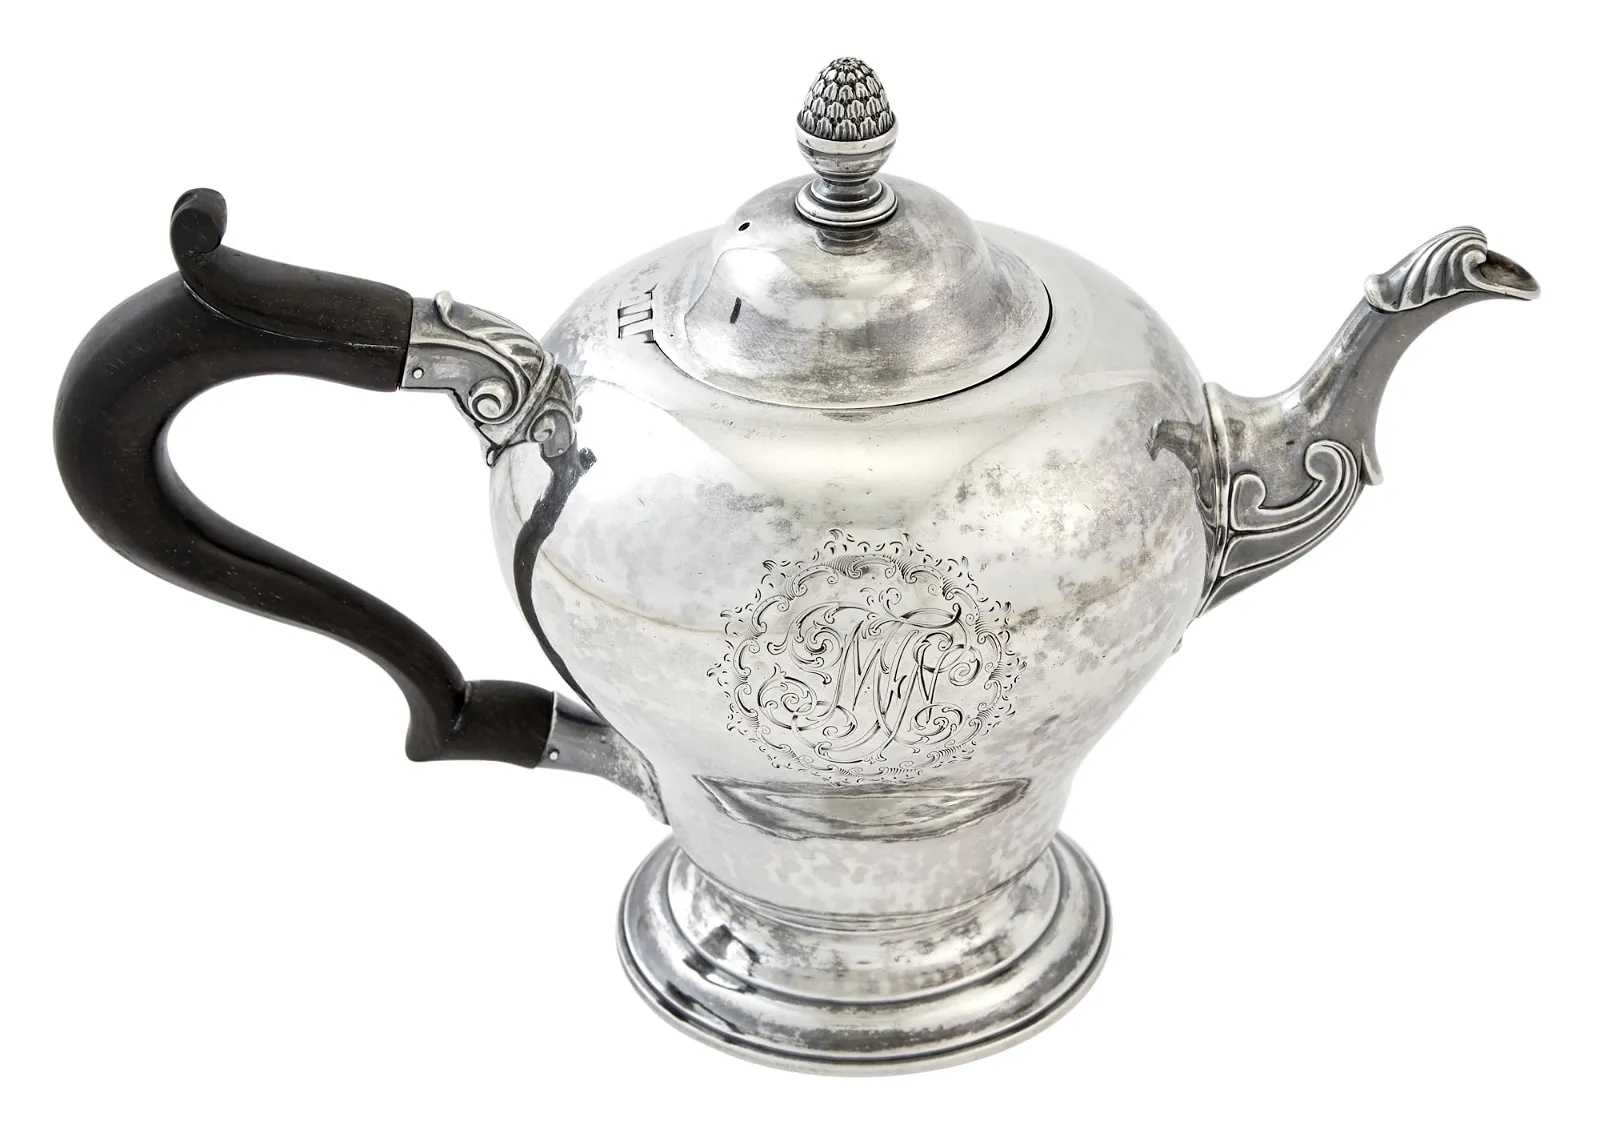 Circa 1762 Daniel Christian Fueter New York Colonial Silver Teapot, estimated at $6,000-$8,000 at Doyle.